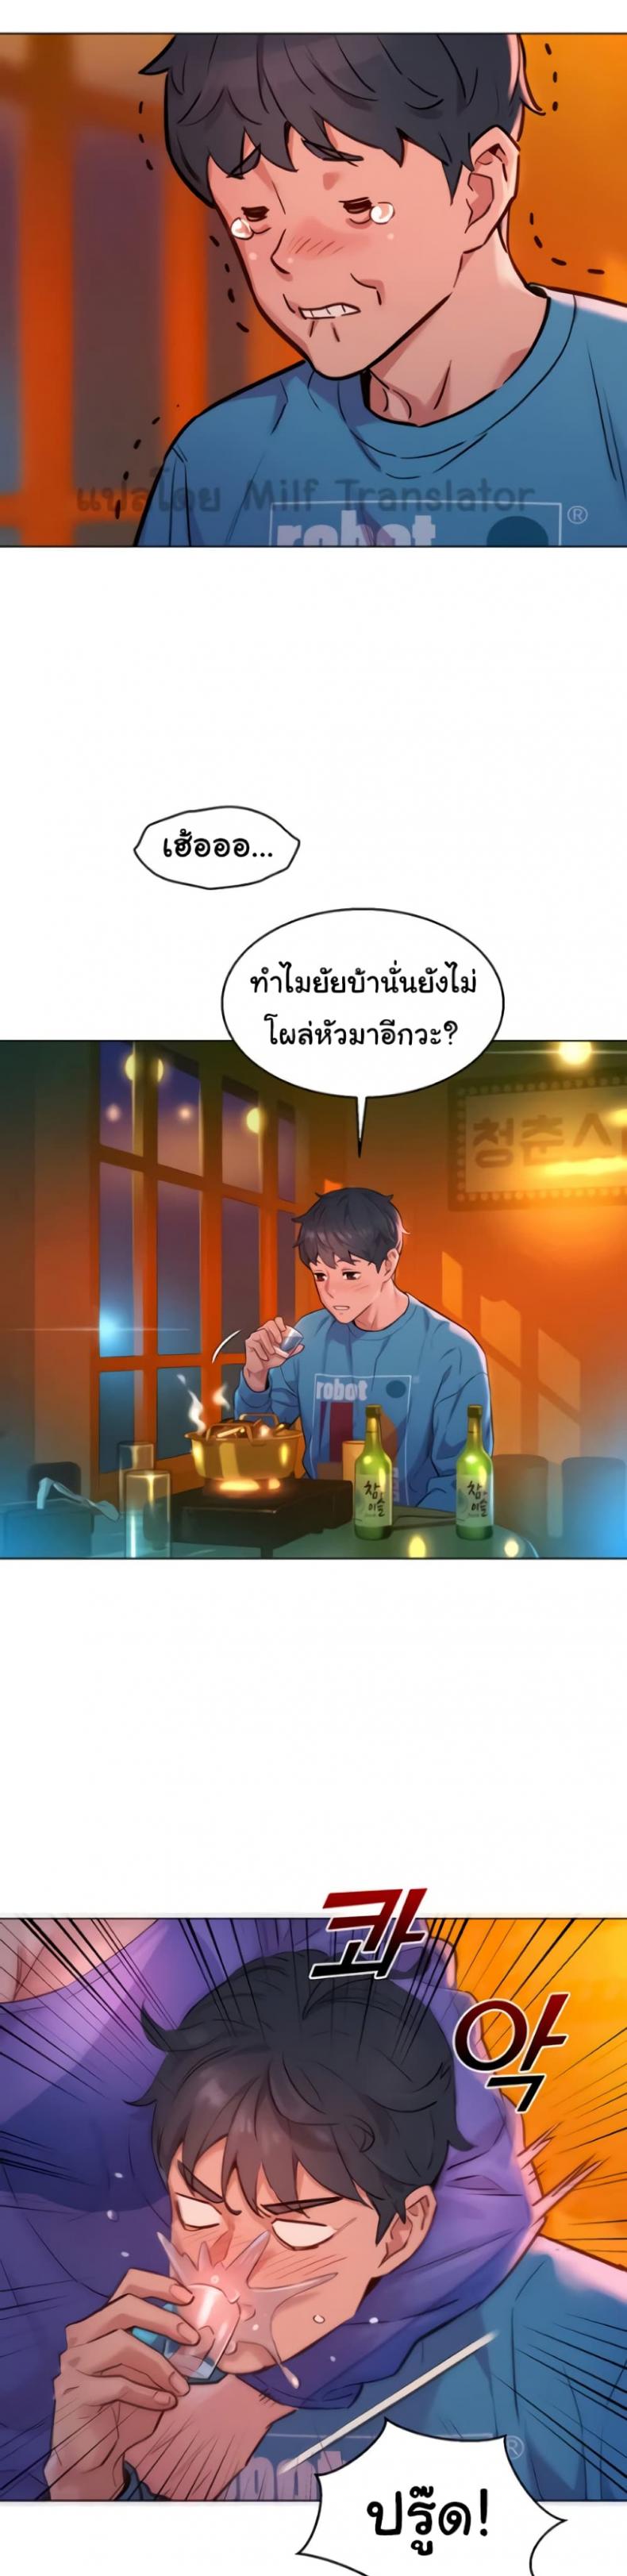 Let’s Hang Out from Today 1 Manhwa Thai